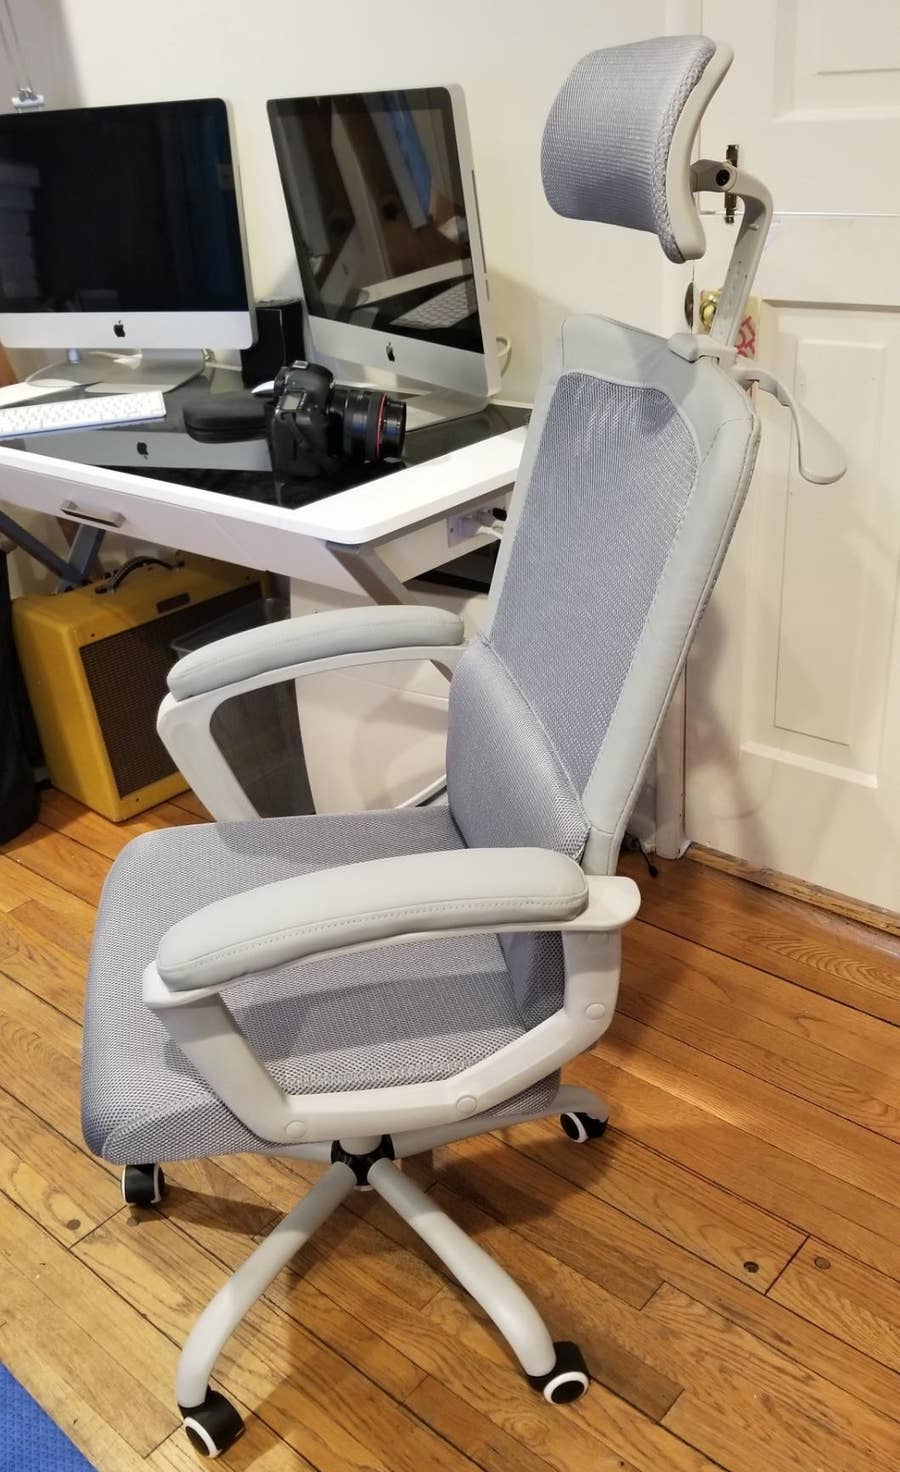 Buy Online - Home Office Chairs - Buzz Seating Online